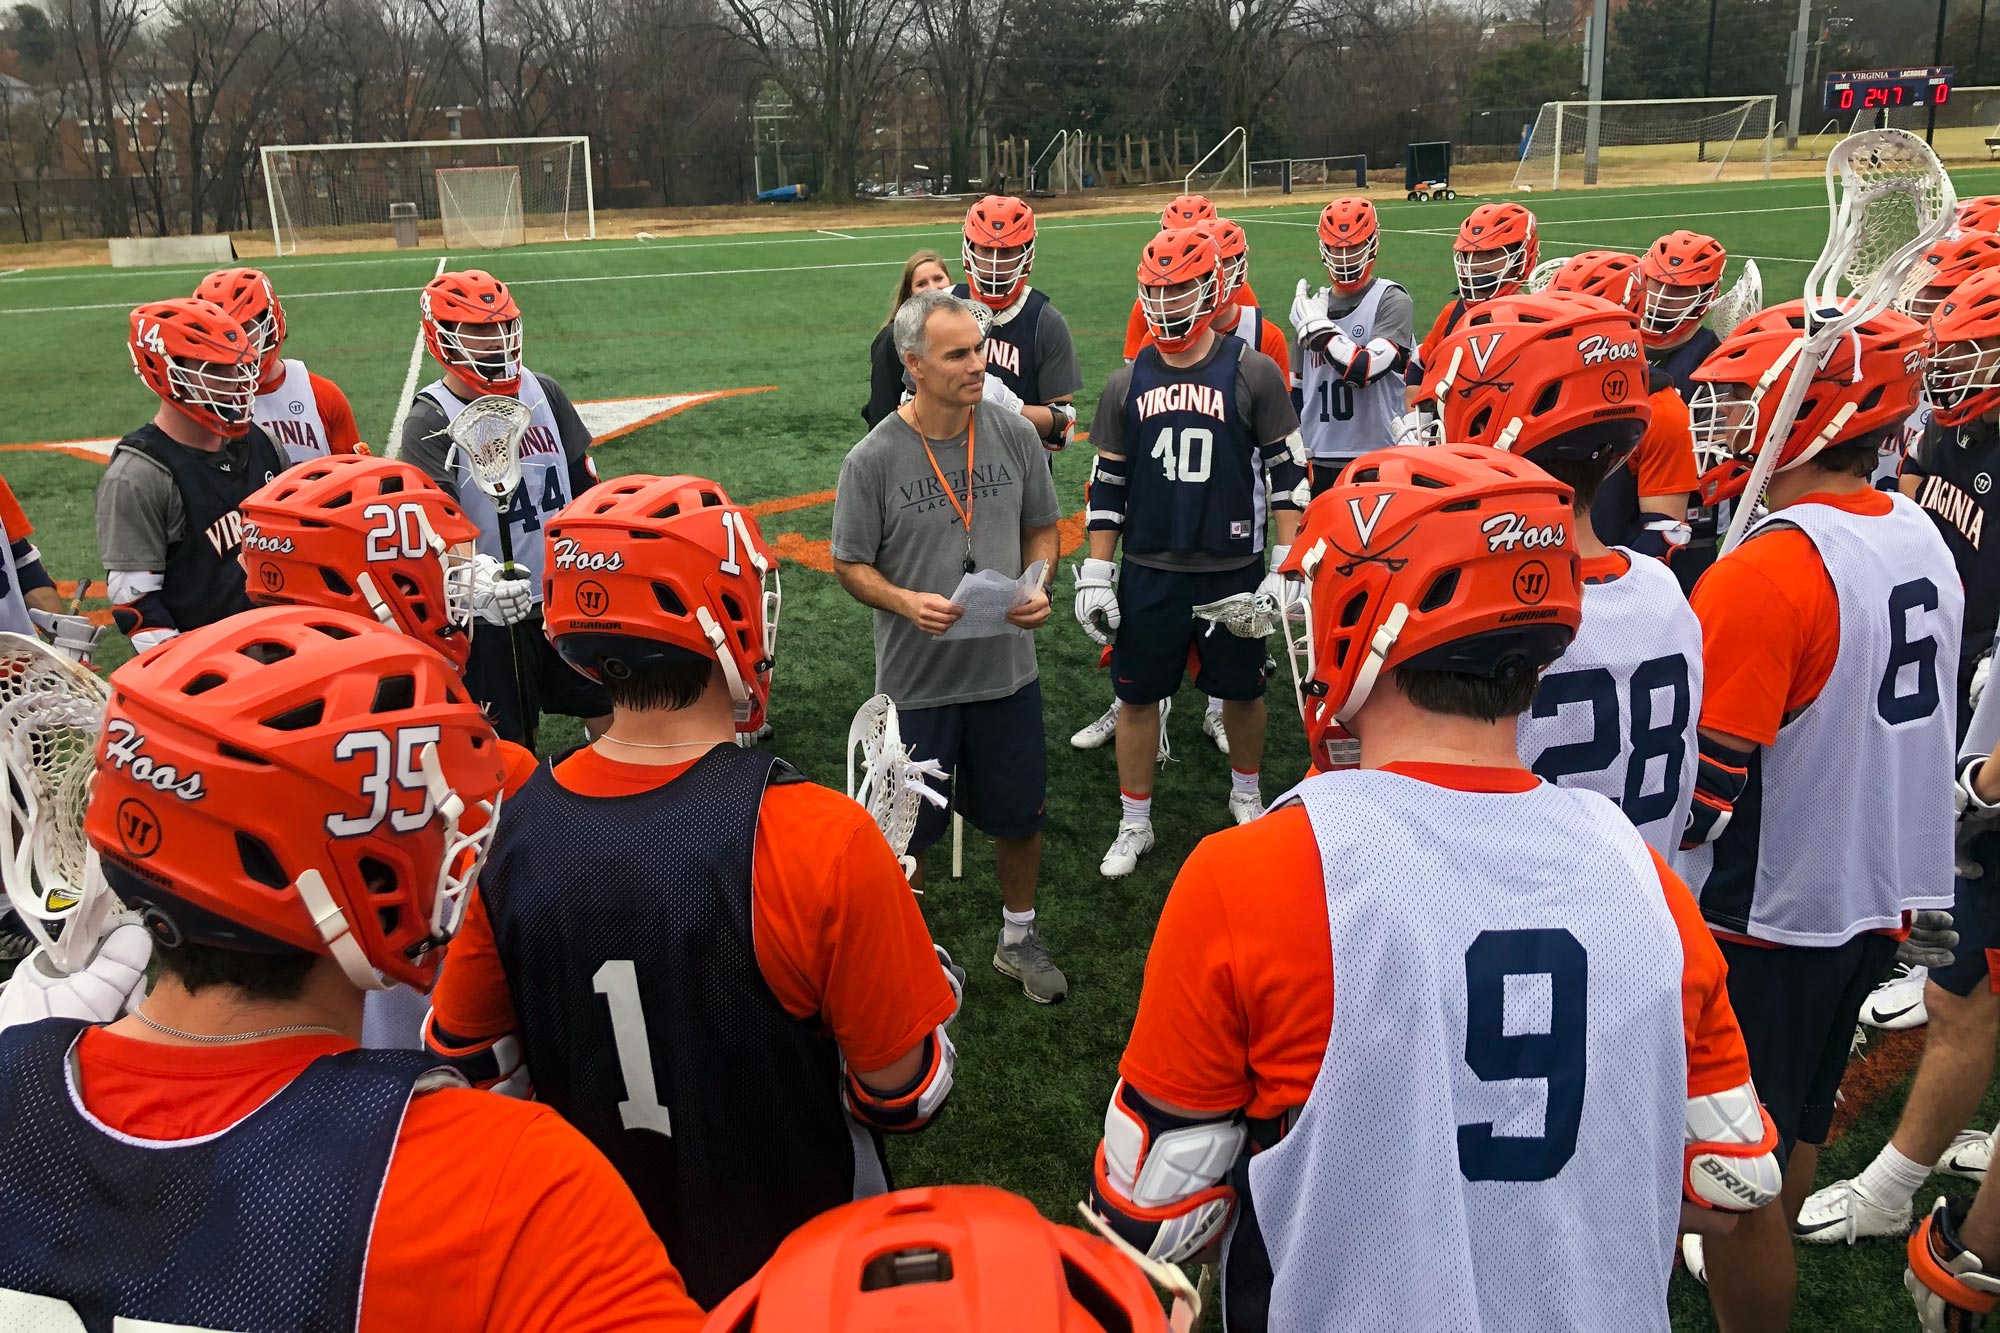 Lars Tiffany speaking to the mens lacrosse team during practice as they huddle around him